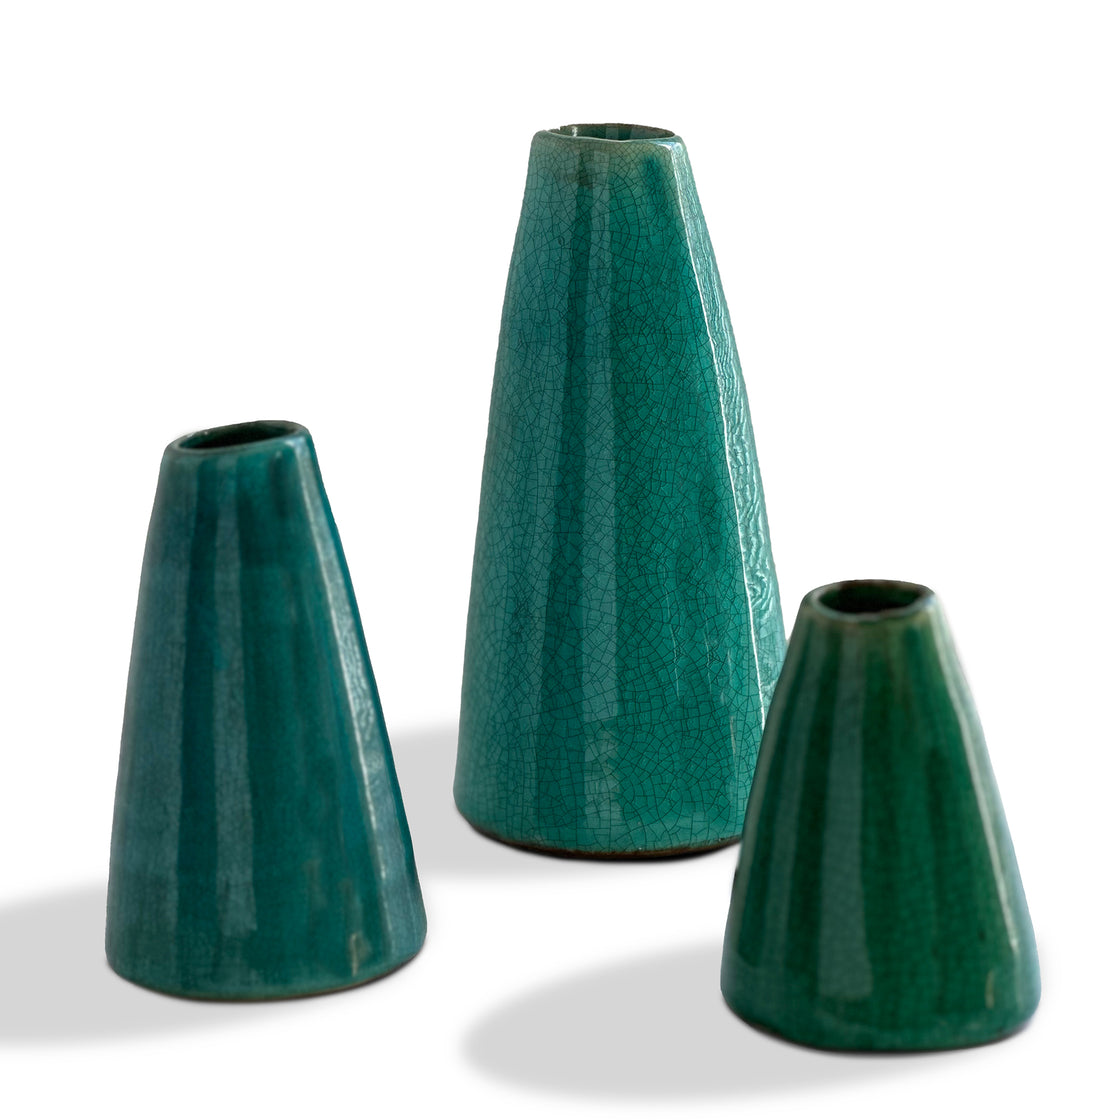 An exquisite collection of three distinct artisanal vases featuring gentle shimmering aqua tones and an elegant crackle finish presented against a clean white backdrop